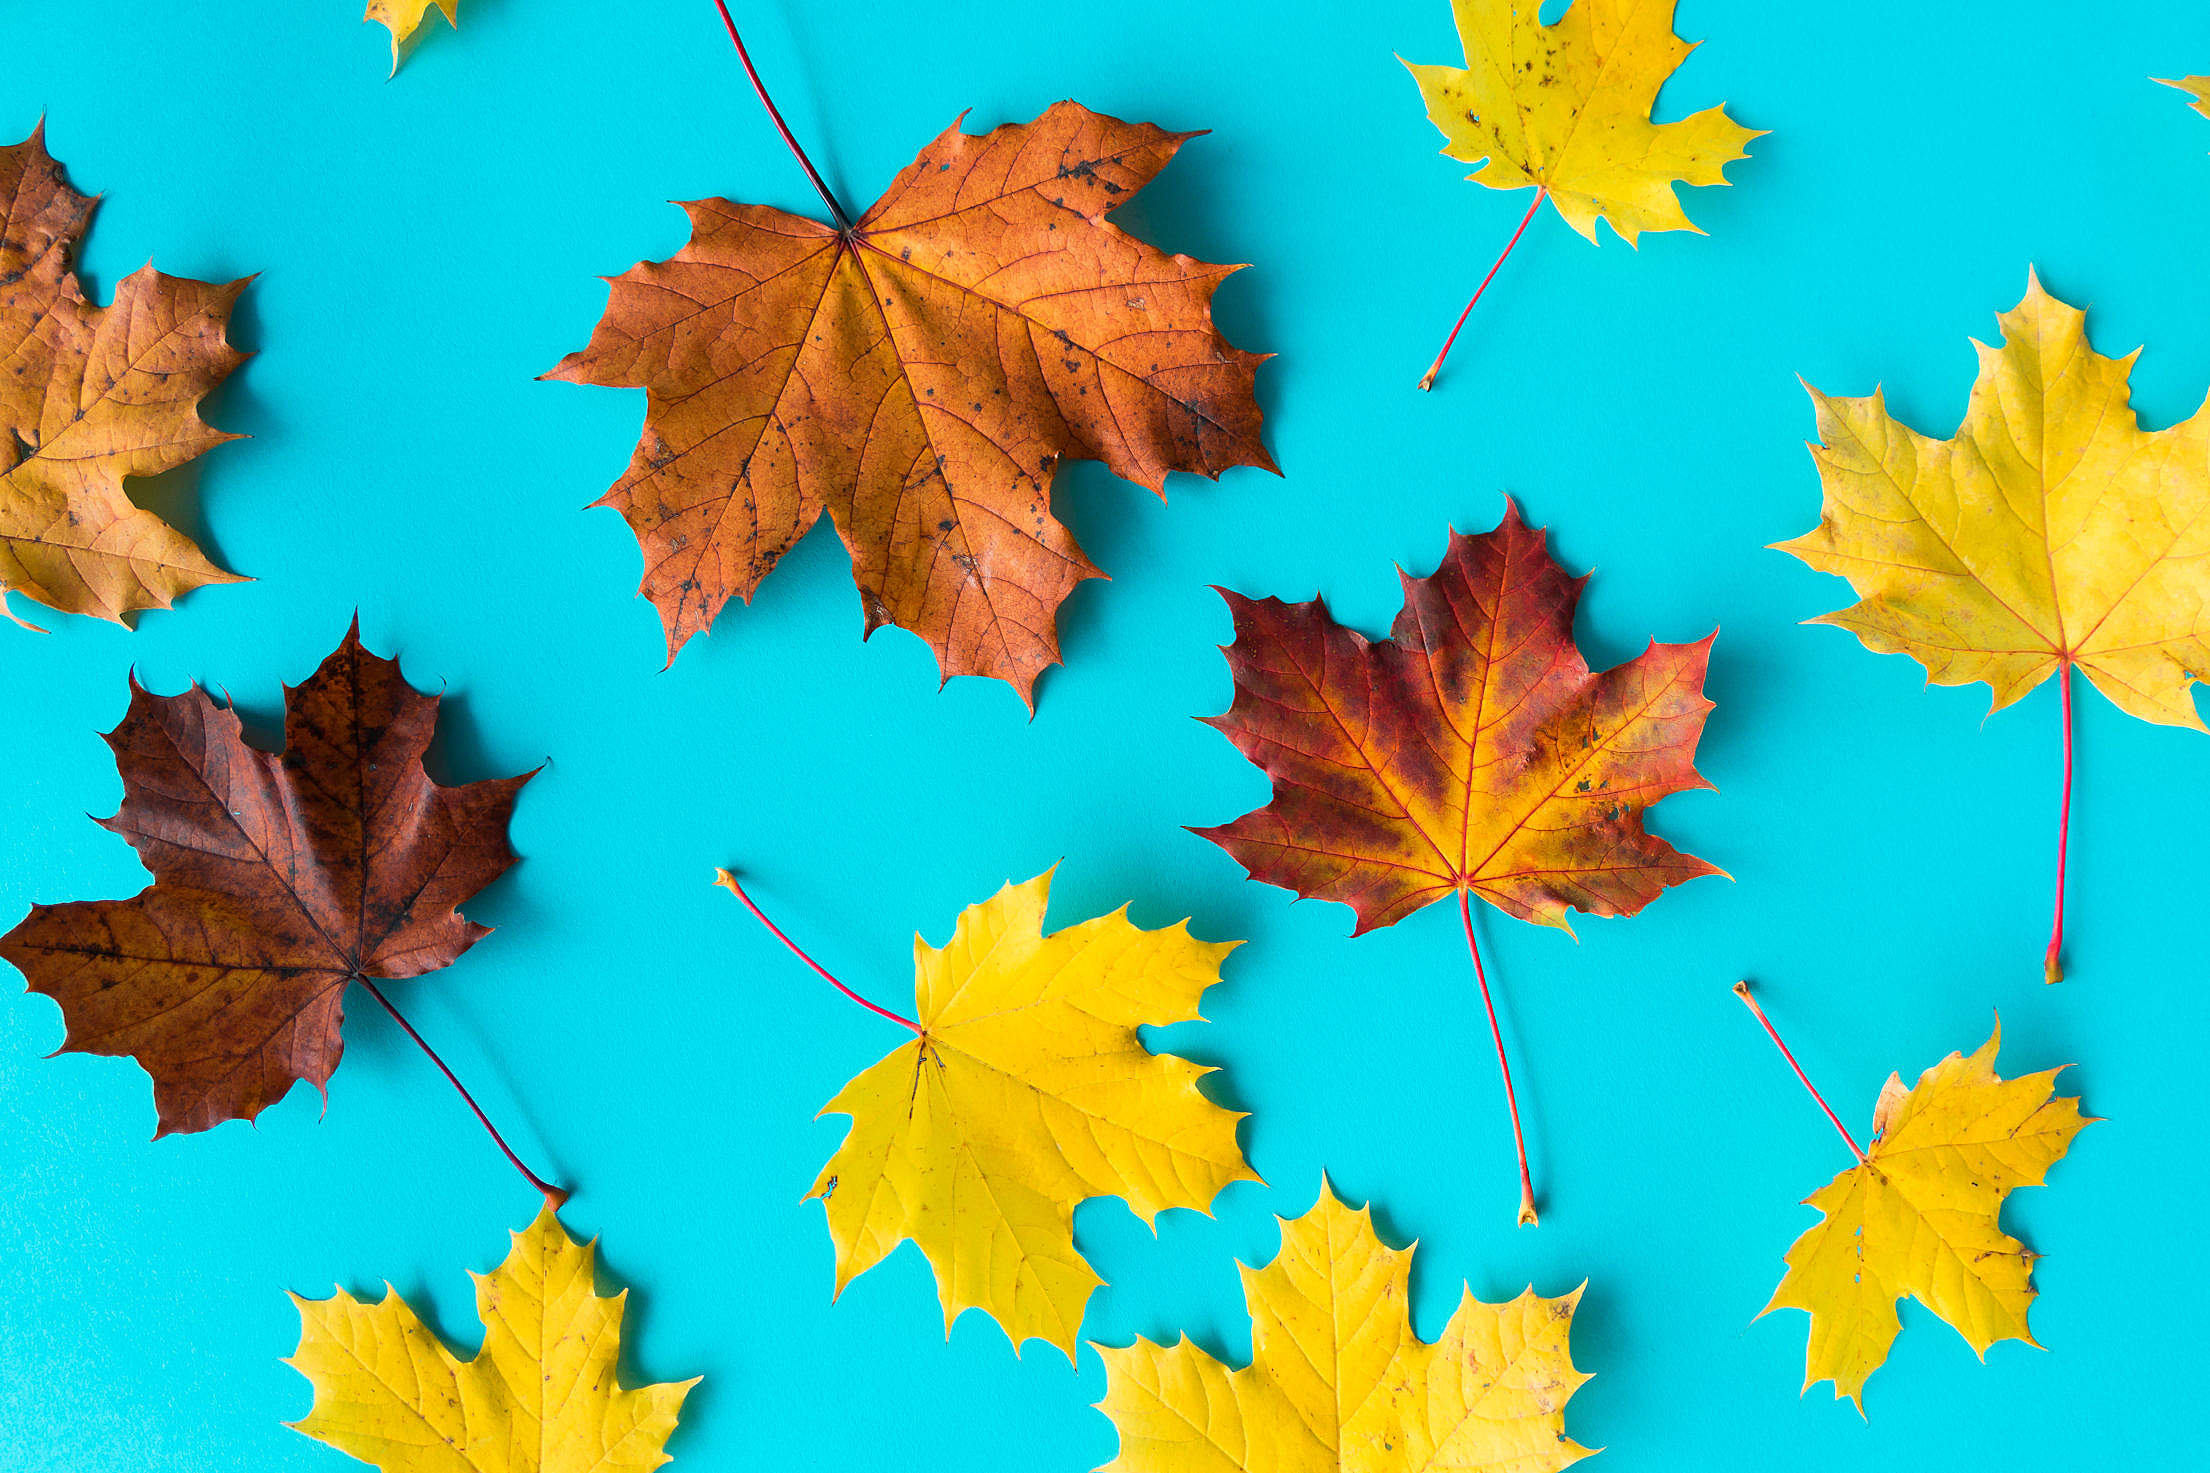 Autumn Leaves on Flat Blue Background Free Stock Photo Download ...